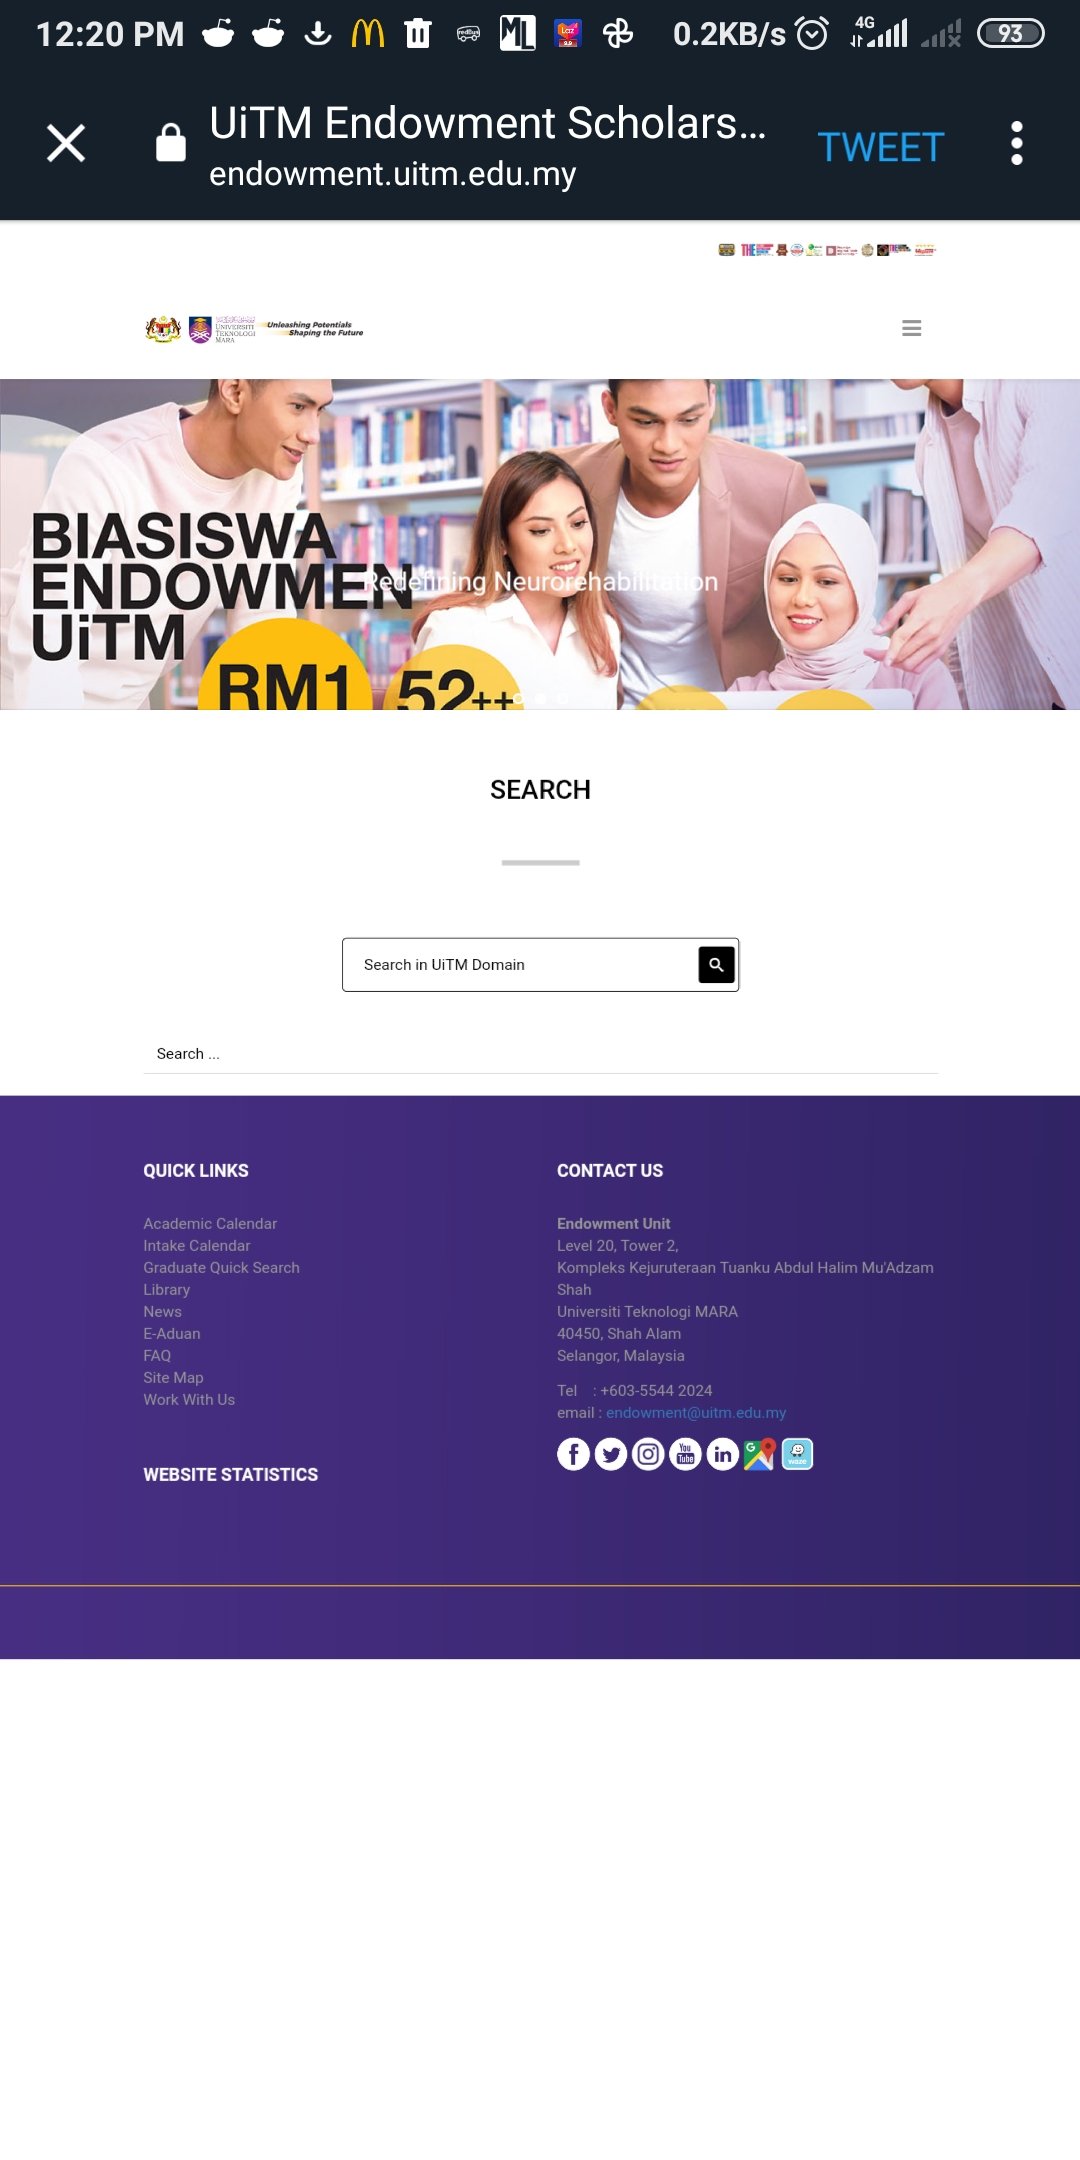 Uitm Official On Twitter Breaking News Universiti Teknologi Mara Uitm Is Proudly Announcing Its First Scholarship Program This Prestigious And Competitive Scholarship Called Uitm Endowment Scholarship Is Now Open For Application Best